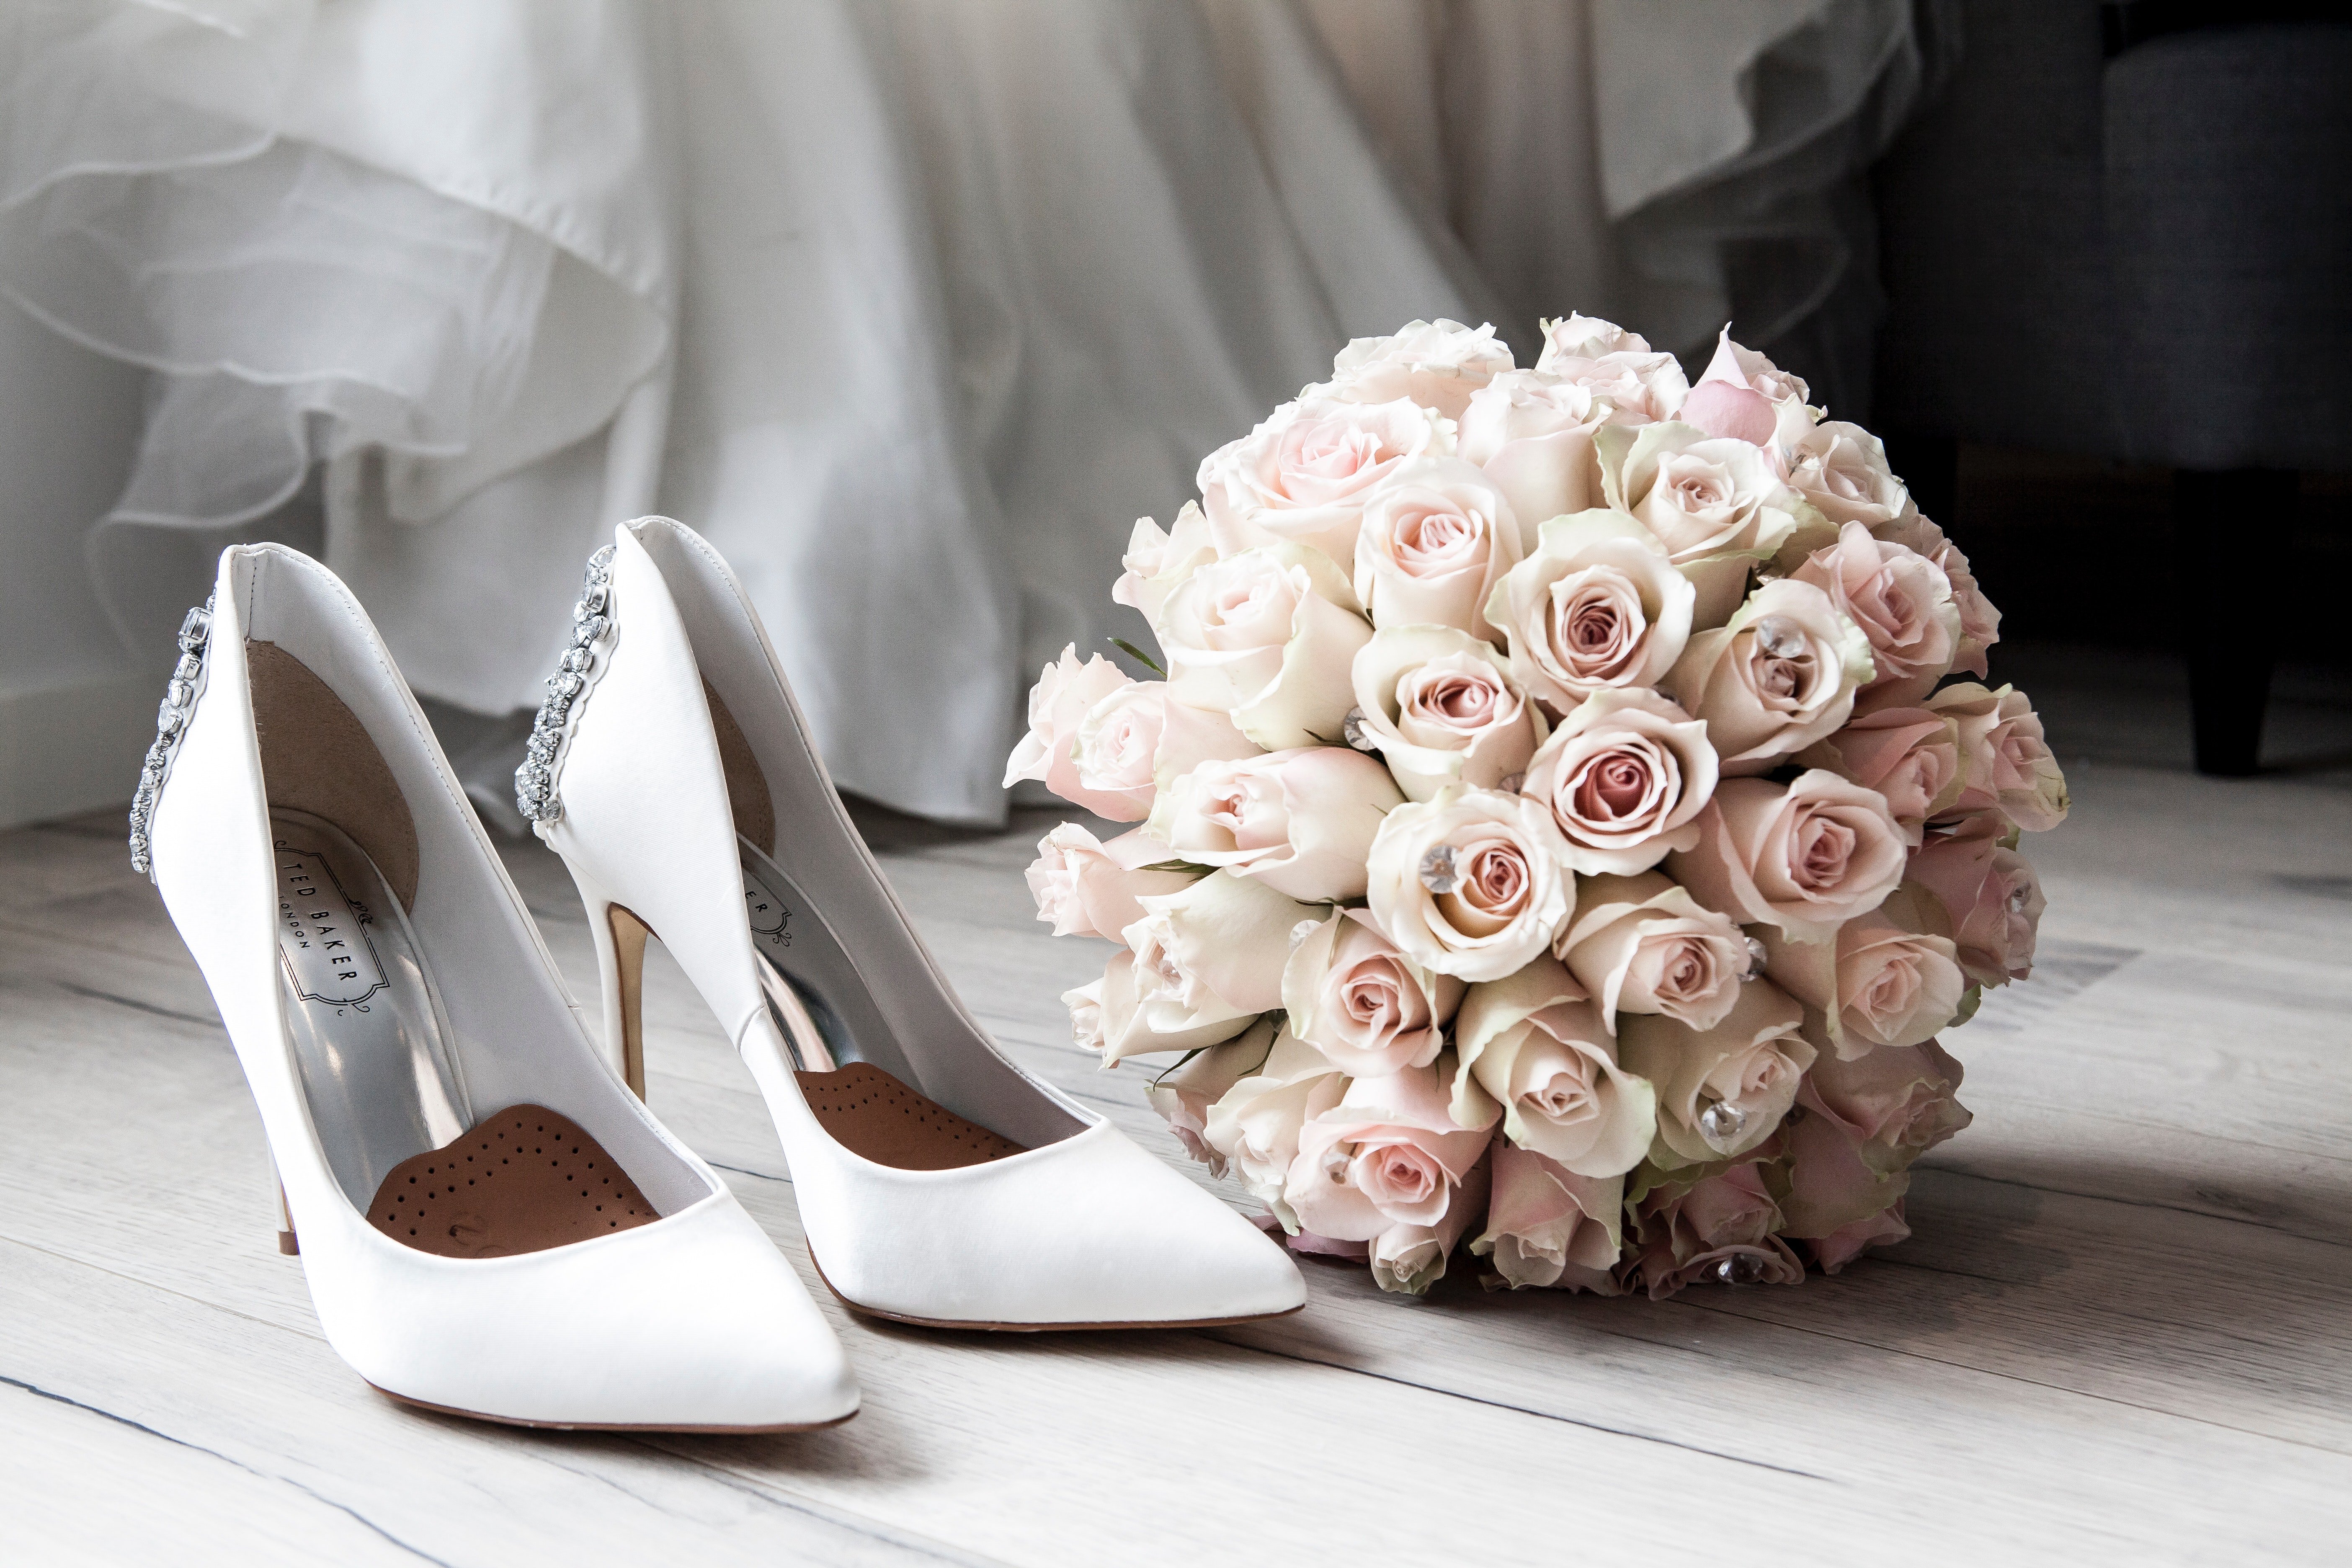 A bouquet of flowers and a pair of shoes | Source: Terje Sollie / Pexels